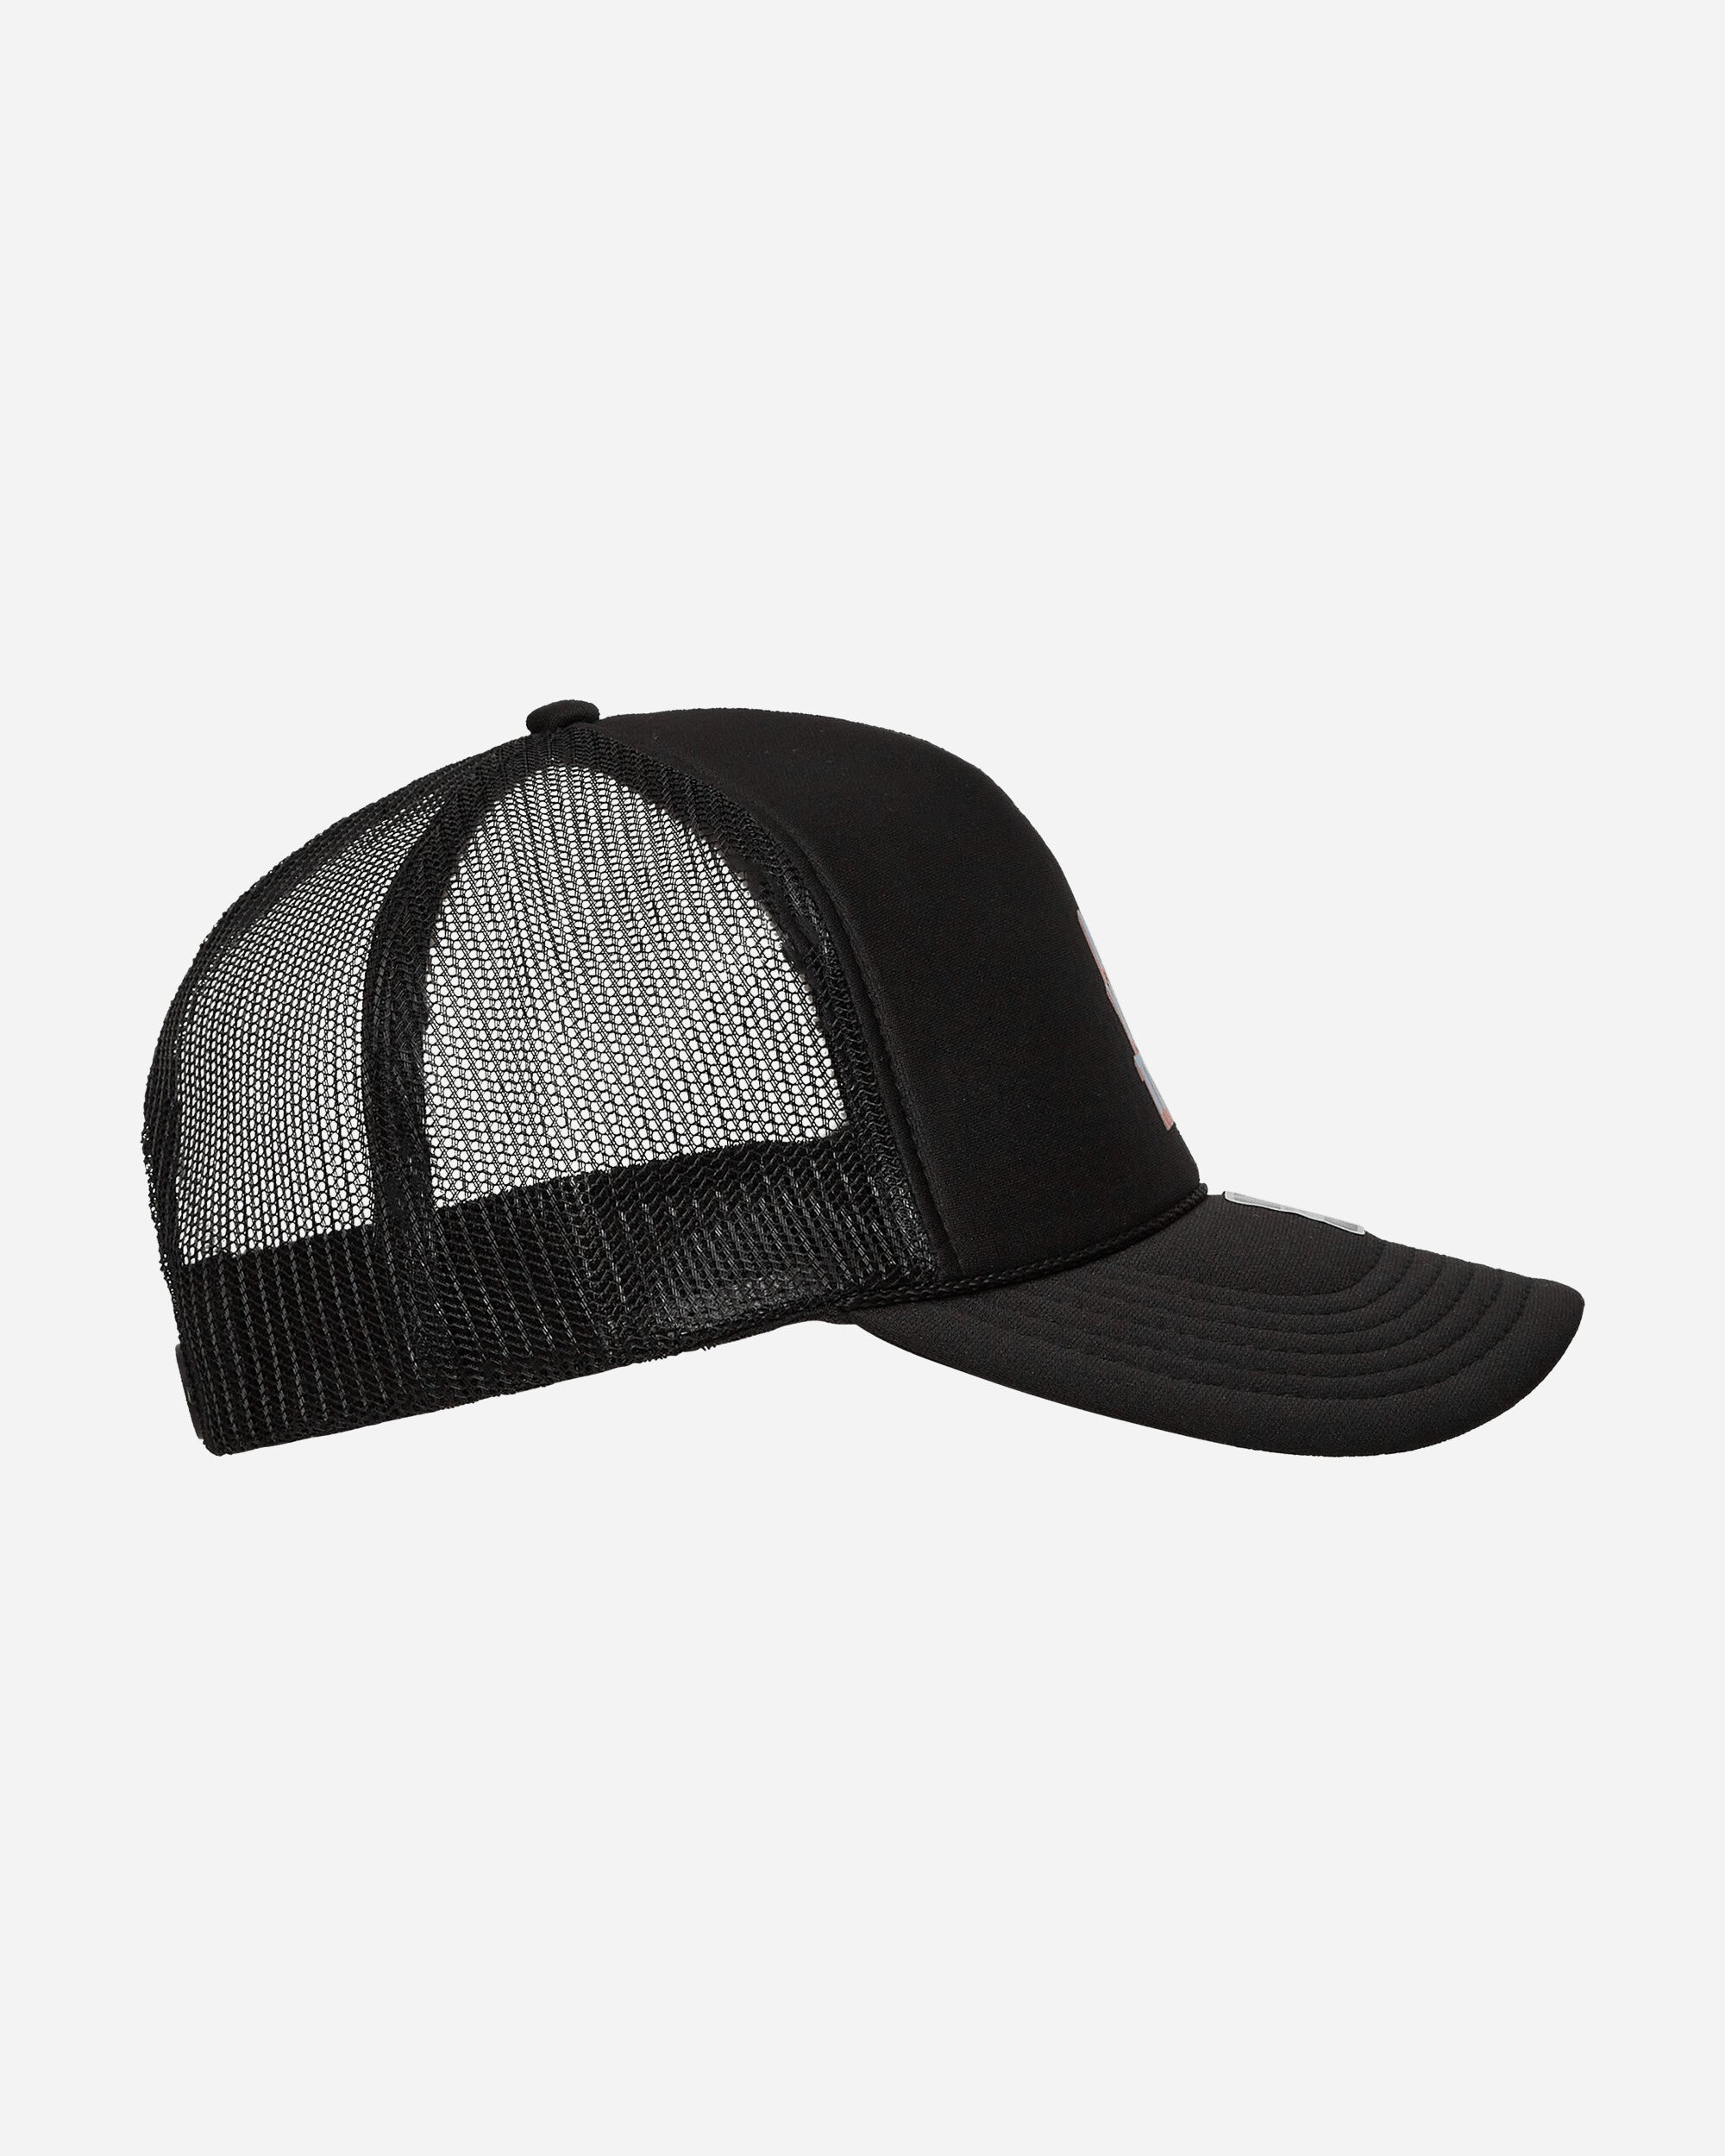 aNYthing Stacked Trucker Black Hats Caps ANY-104 BK